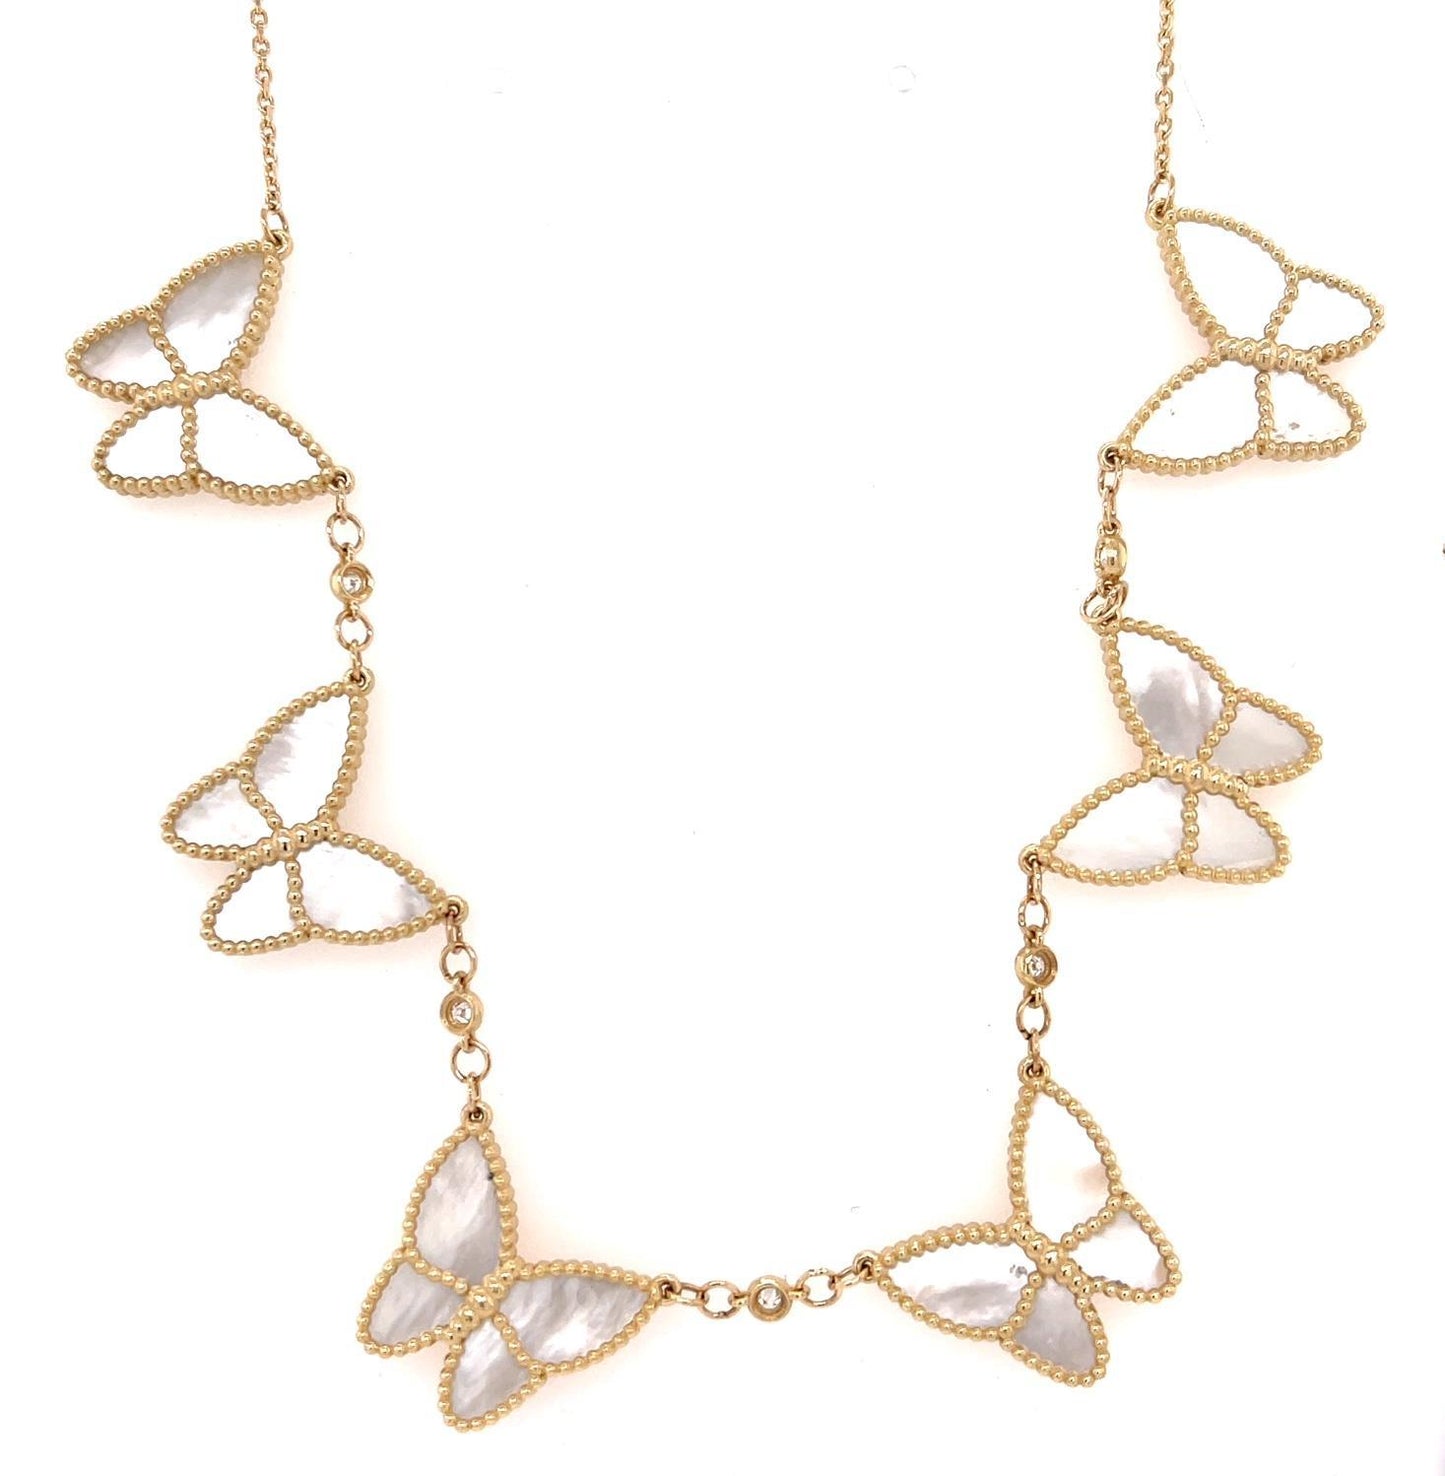 We are utterly charmed by this asymmetrical charm necklace! PRICE: .00